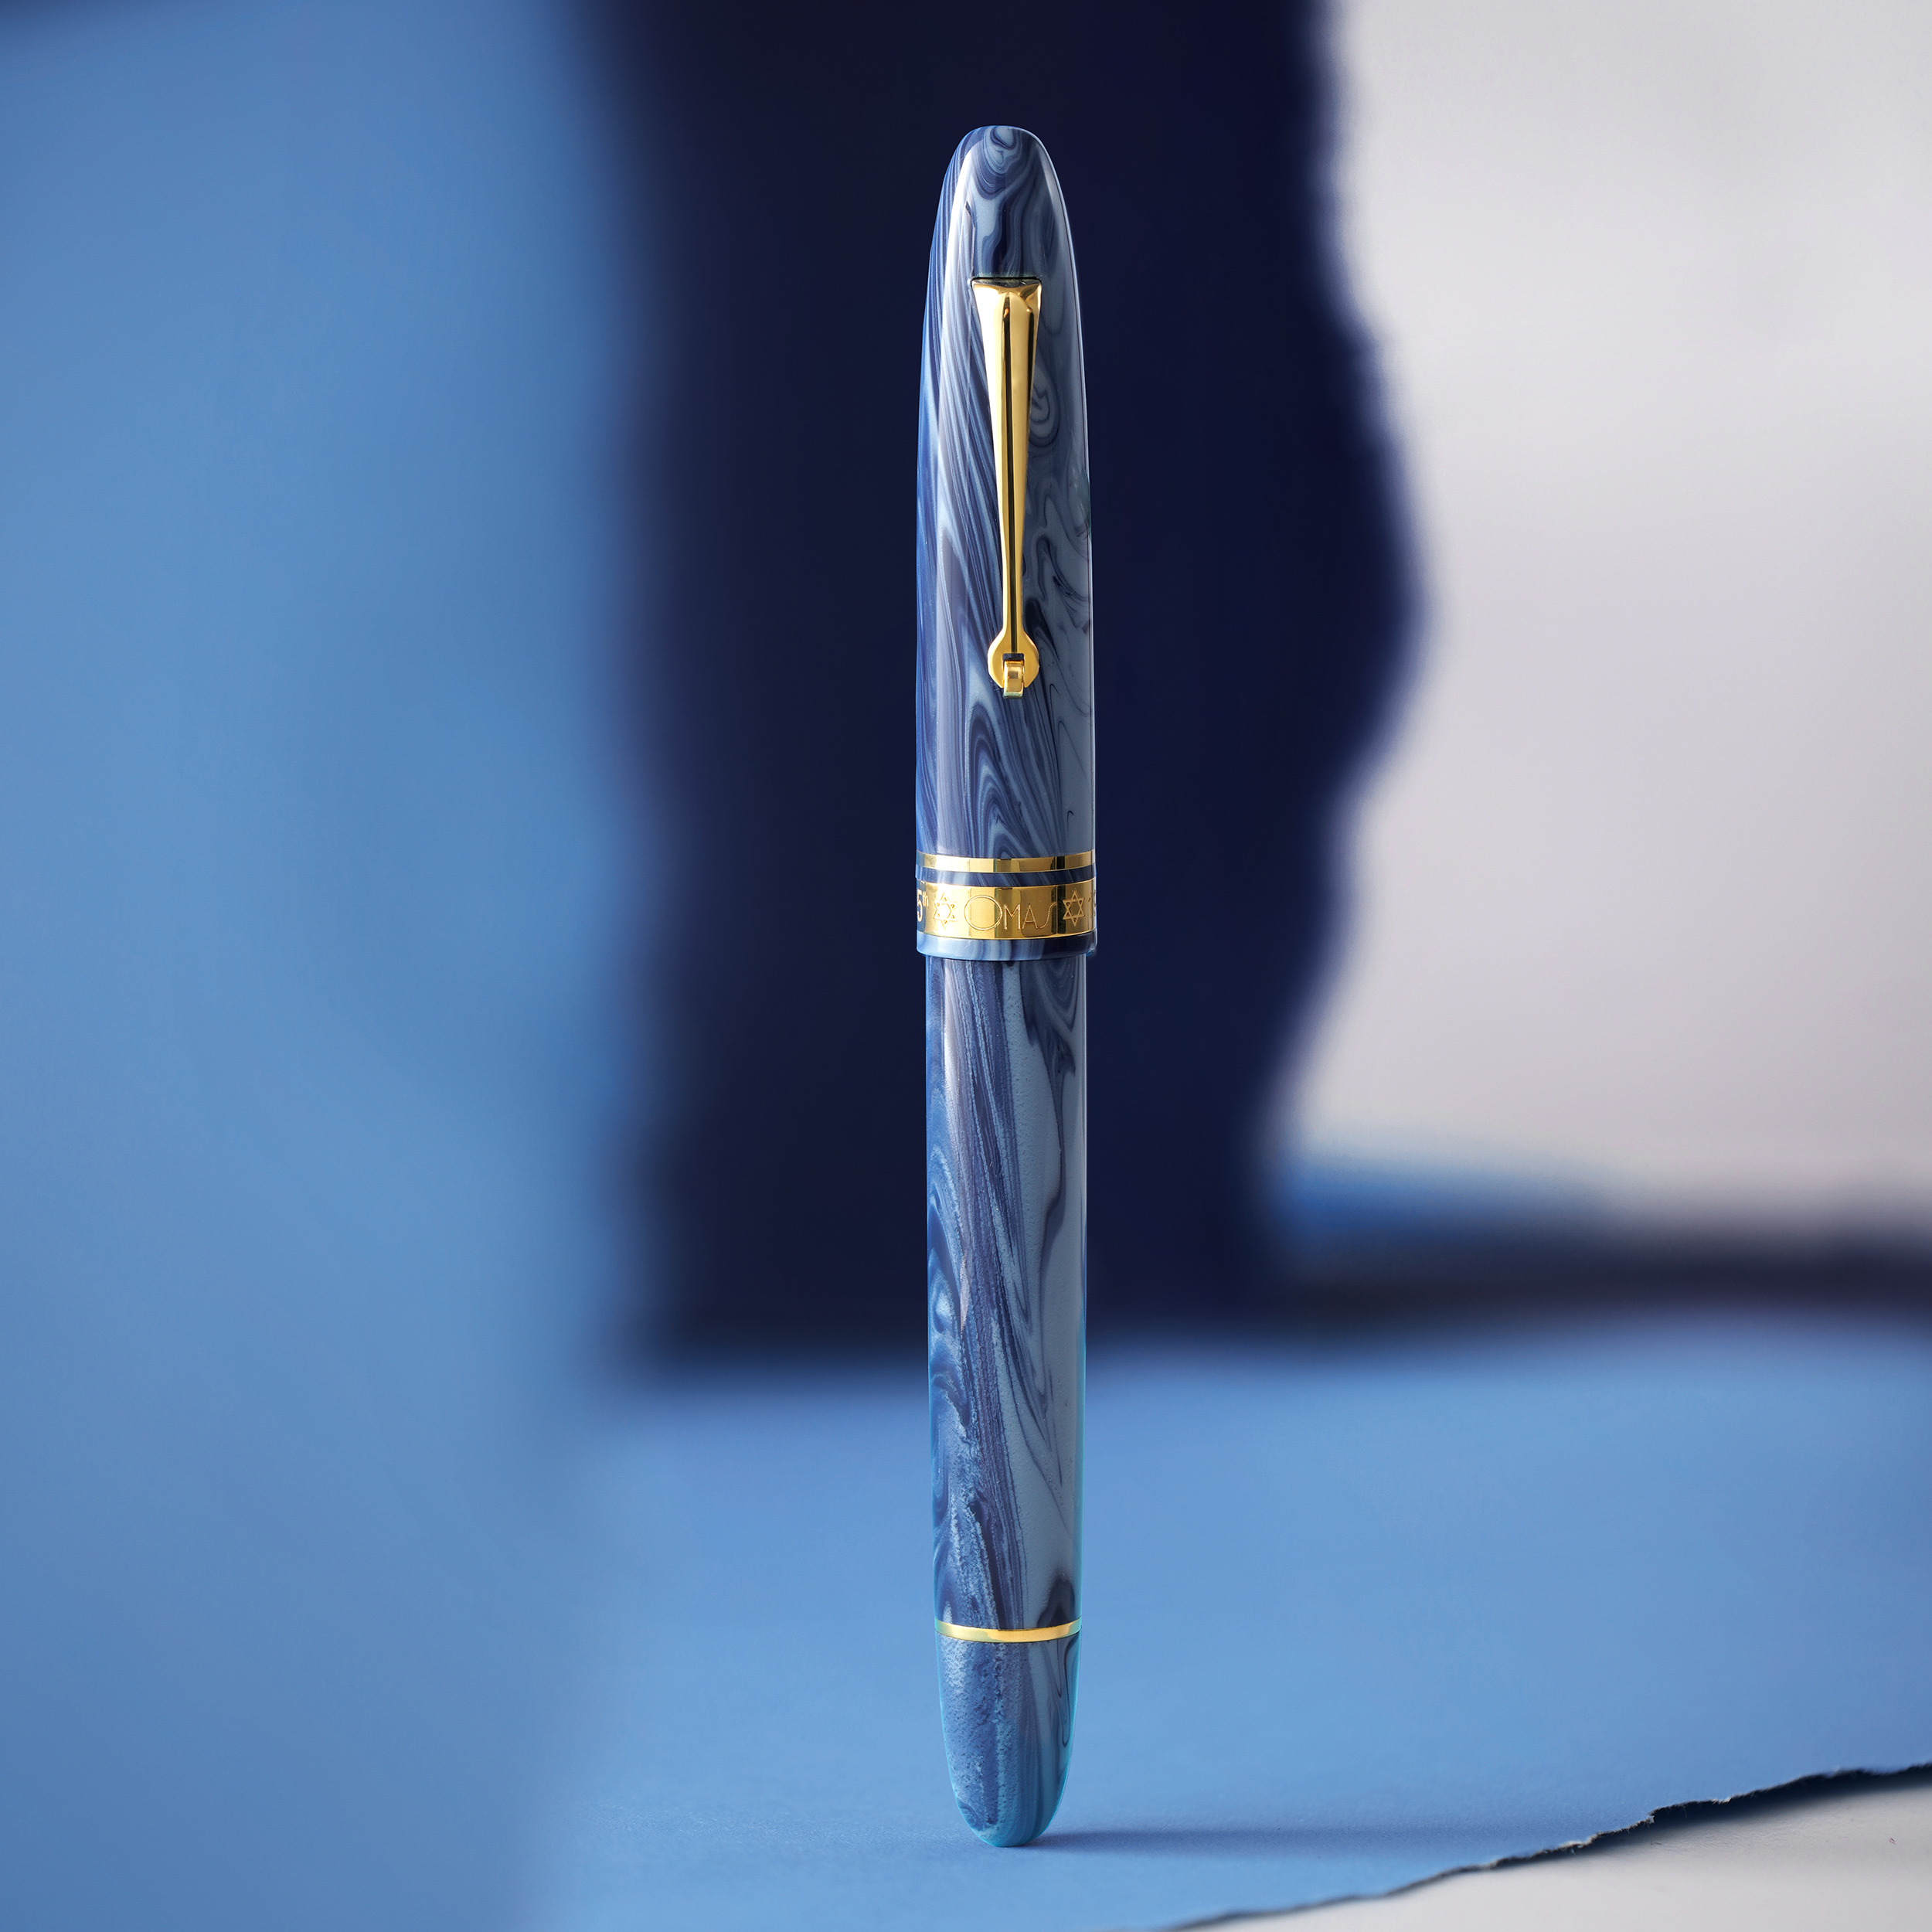 Omas Ogiva Israel Limited Edition Gold Trim Fountain Pen - Pencraft the boutique